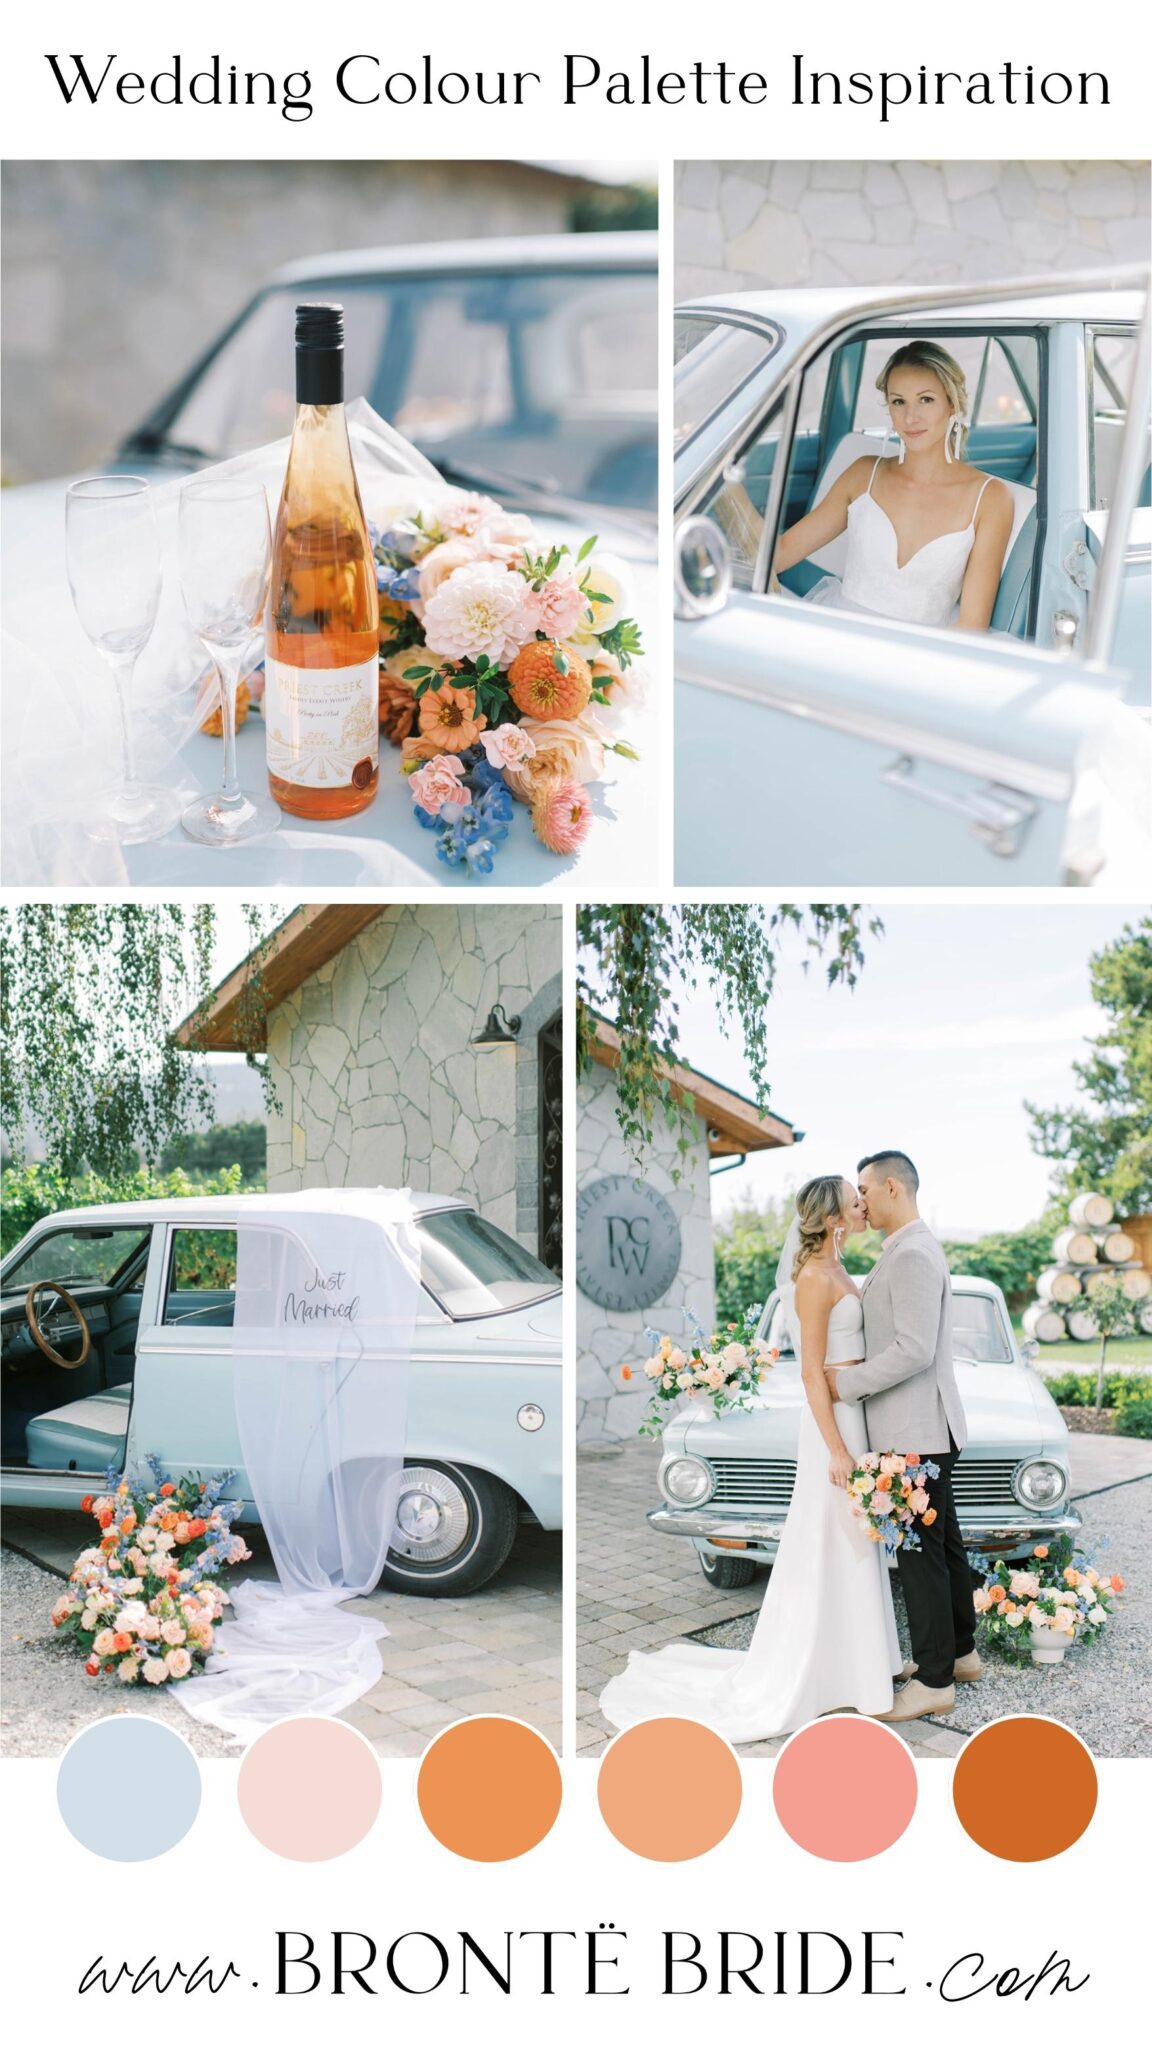 Modern Colour Palette Inspiration | Vintage Car & Summer Florals | summer wedding inspiration featured on Brontë Bride with a colour palette of orange, peach, and baby blue